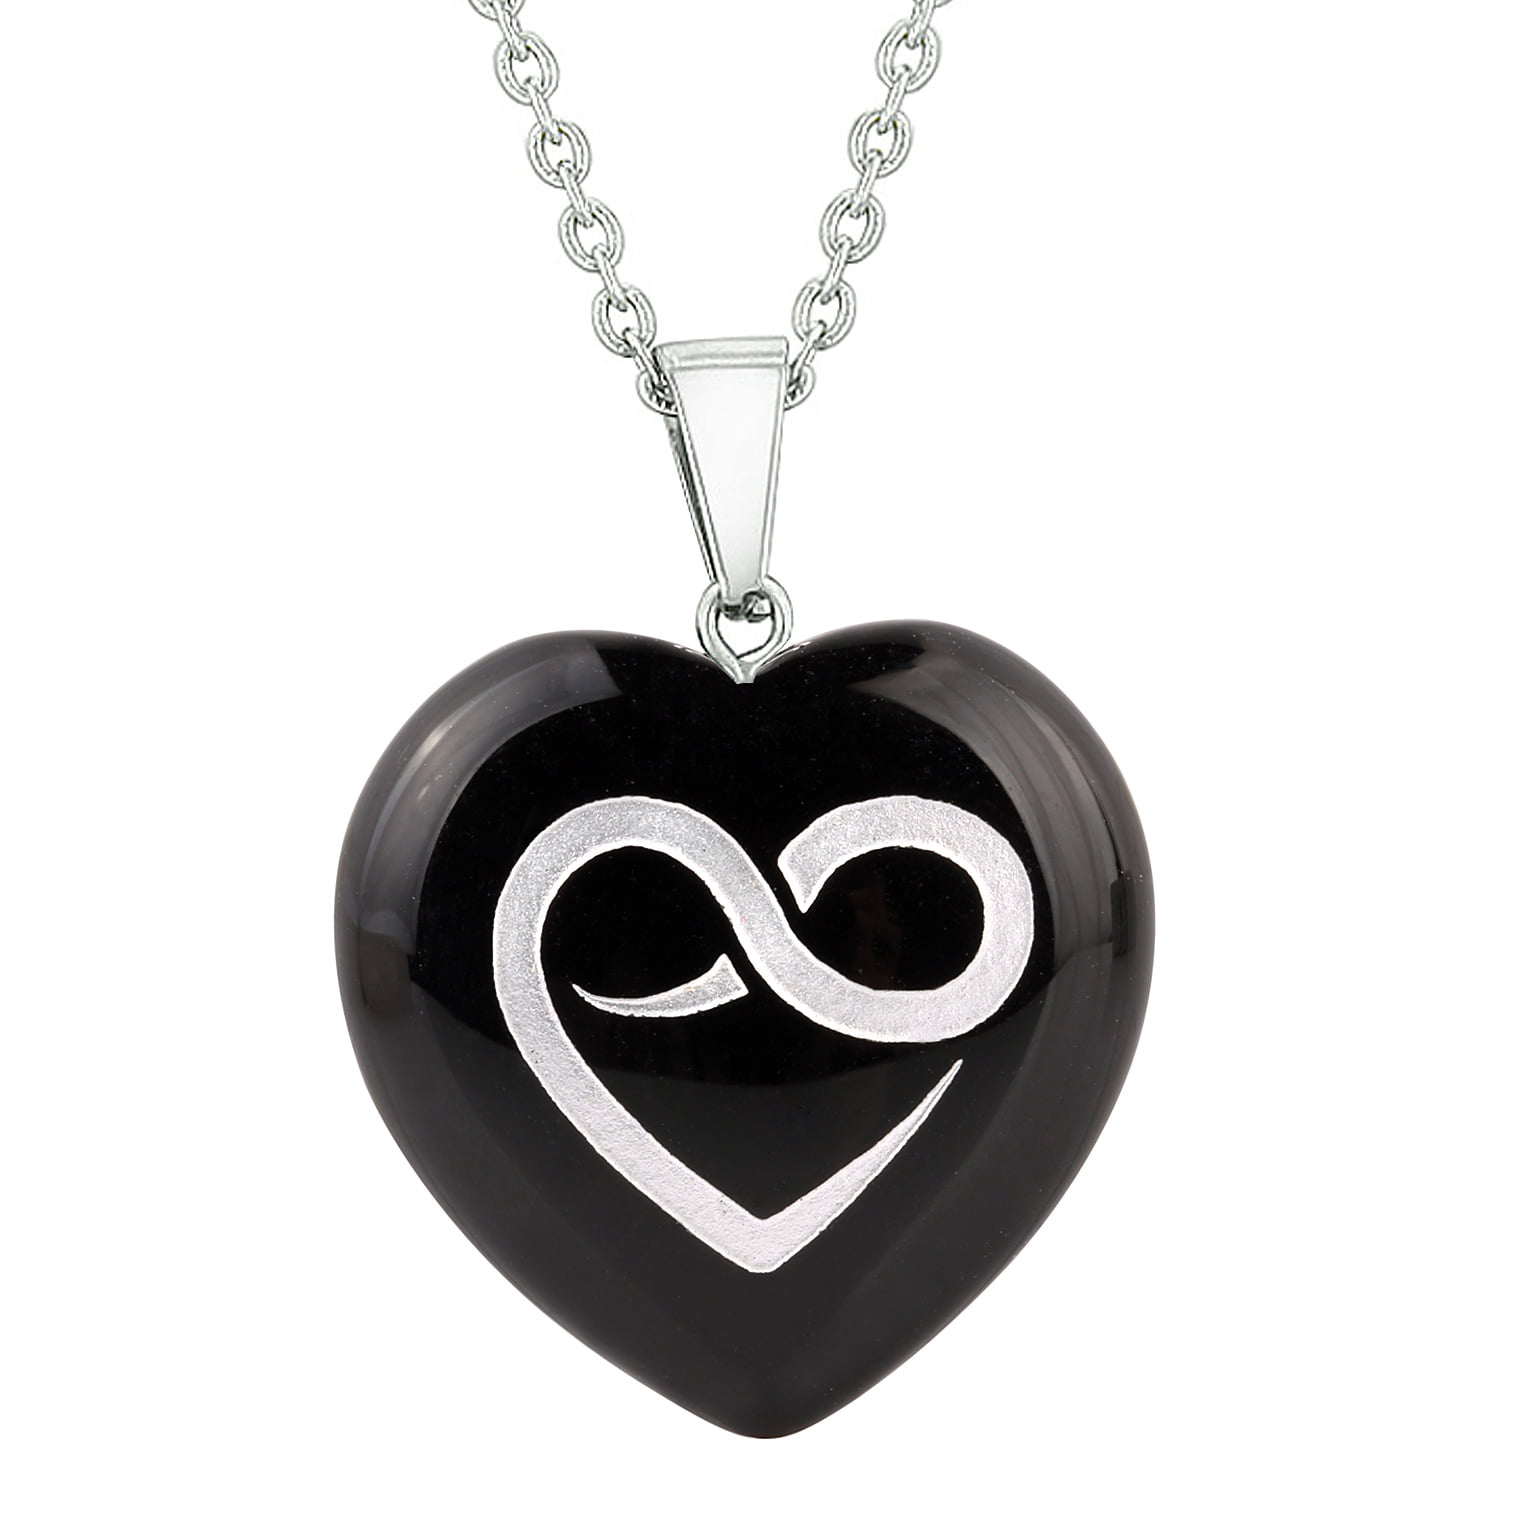 Amulet Infinity Eternity Heart Love Power Protect Energy Black Agate Puffy Heart Pendant 18 Inch Necklace